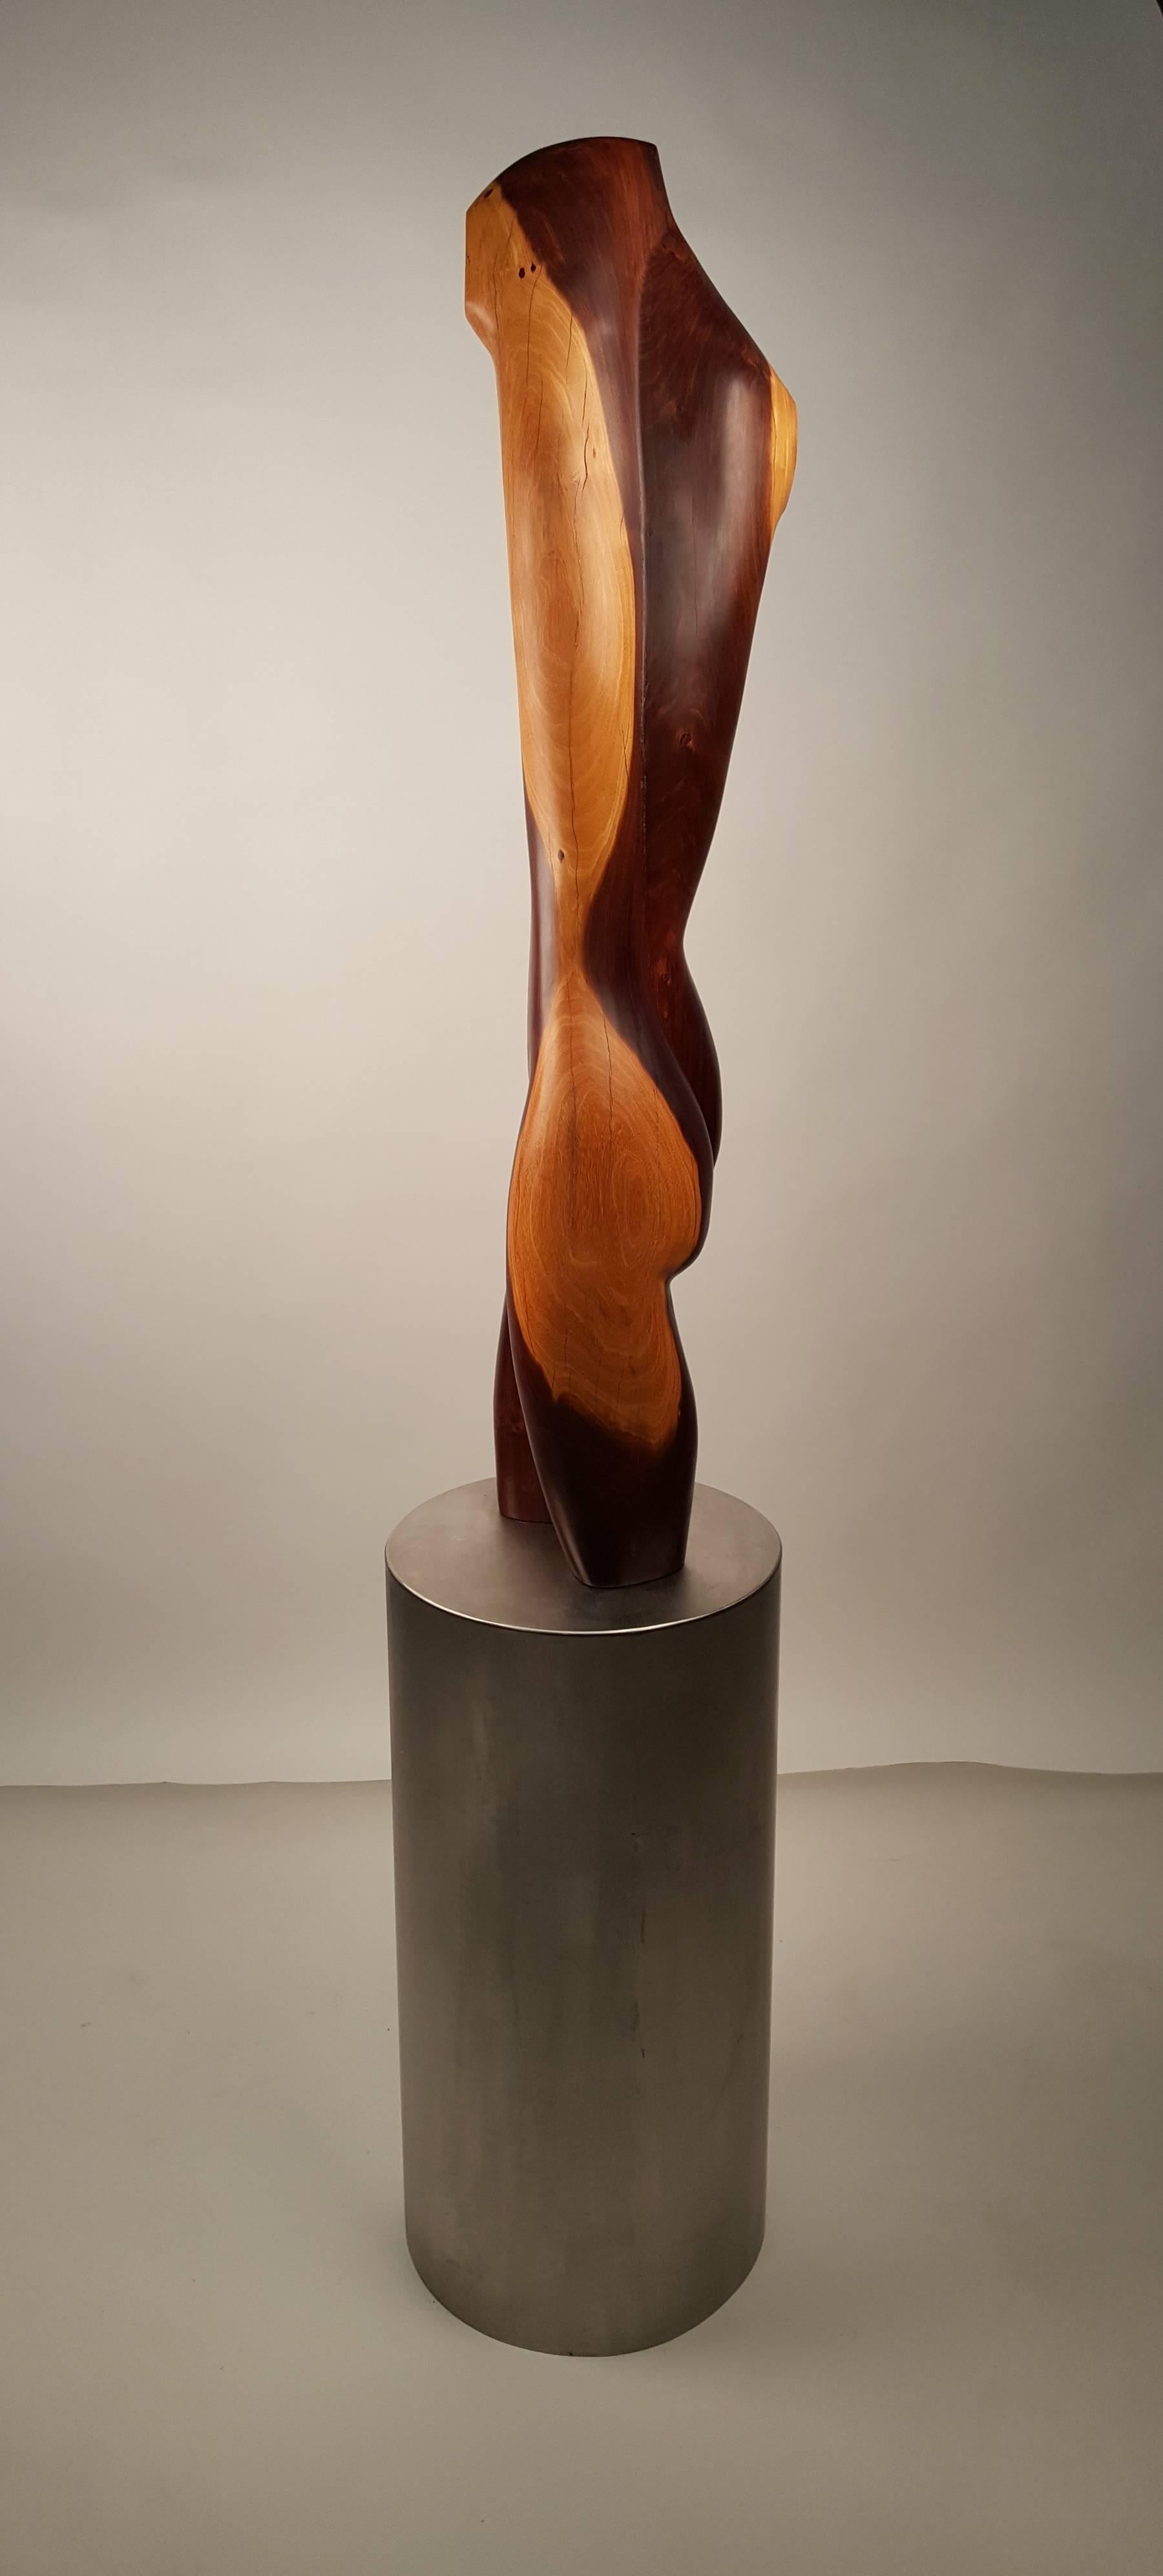 Brushed Solid Ebony Norman Ridenour Sculpture 1970s